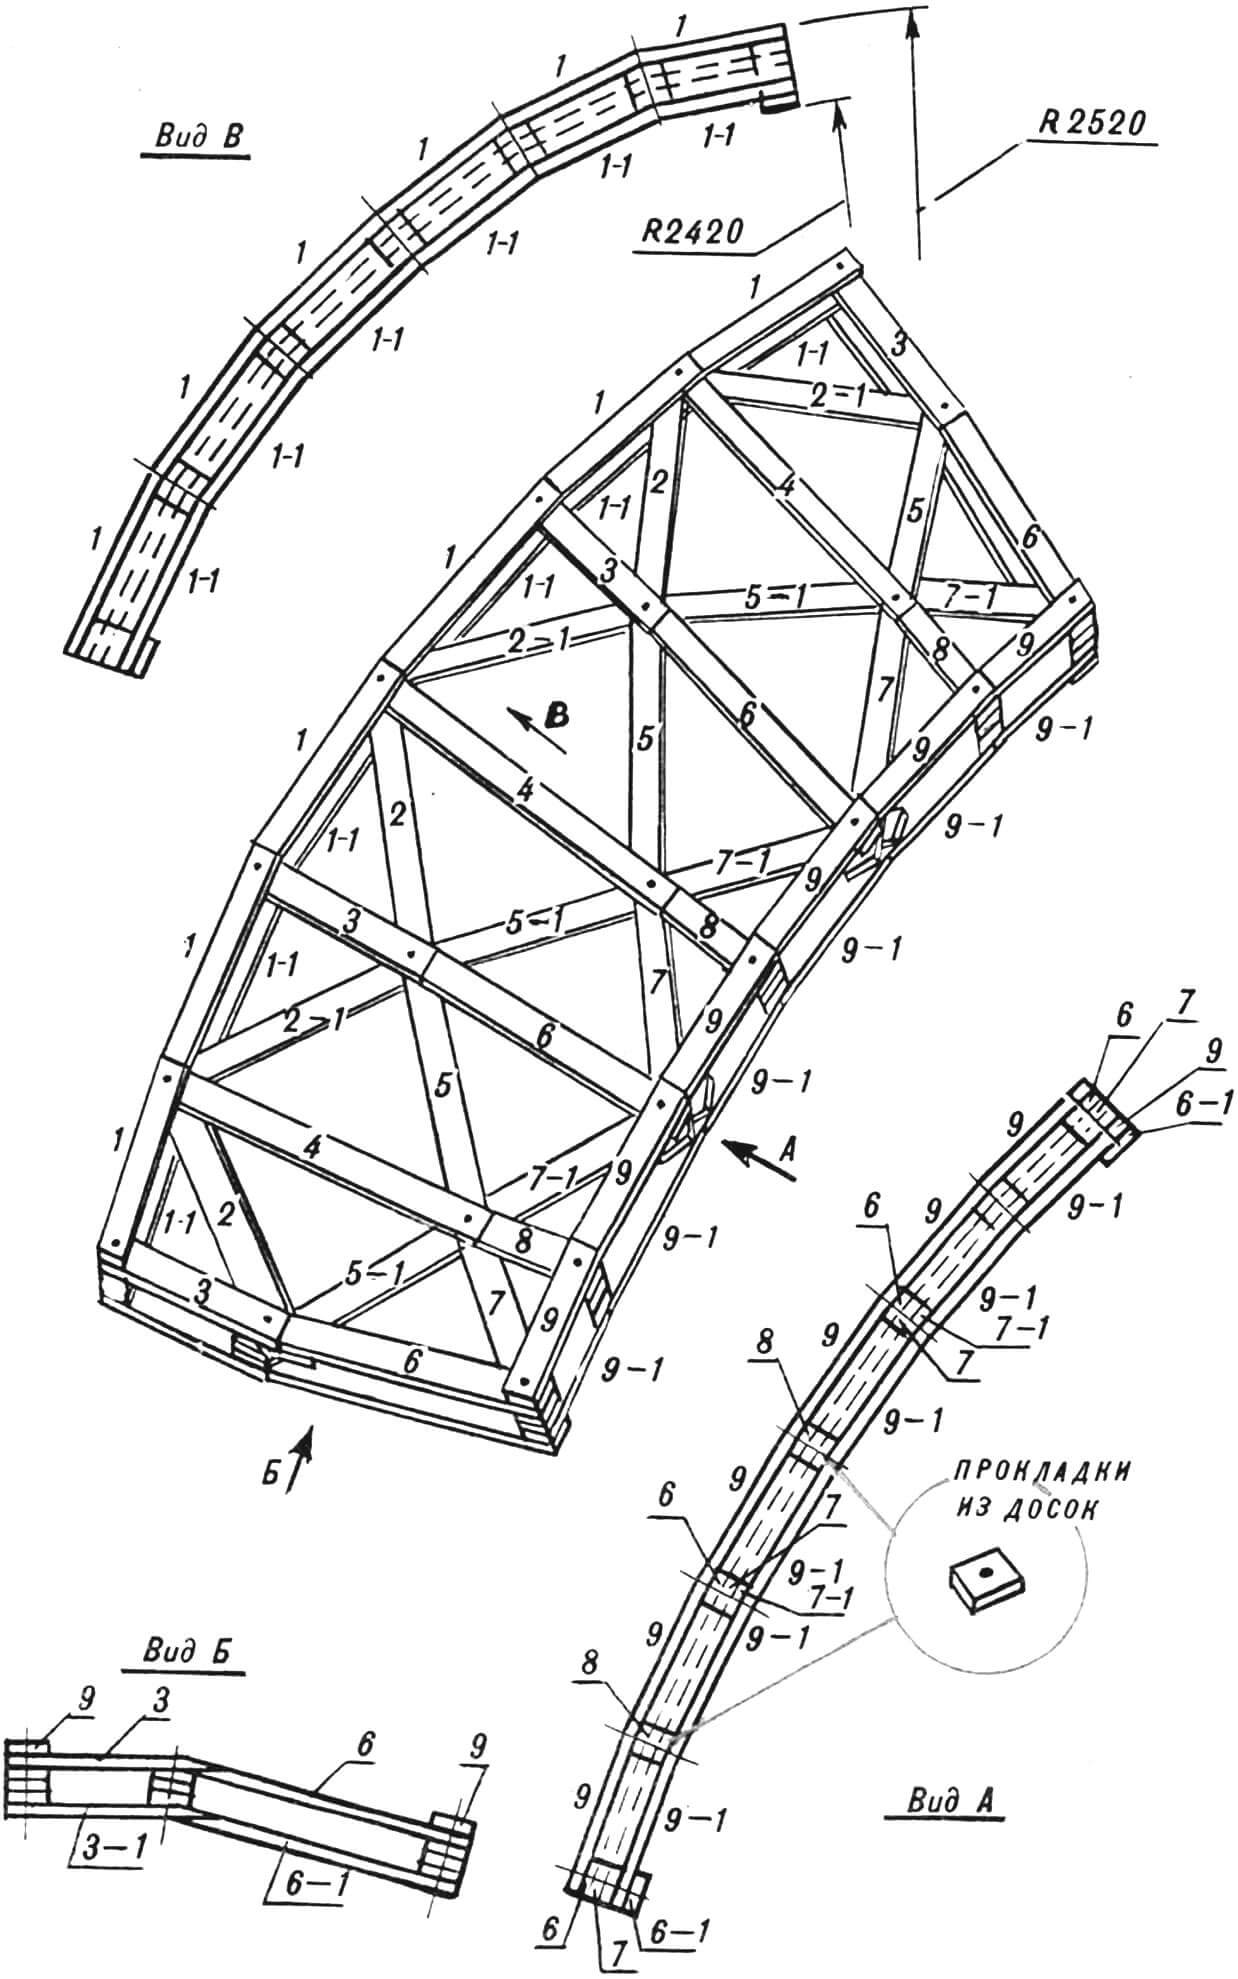 Assembly diagram of the arched frame element. Numbers on the drawing indicate the rod numbers according to the table.